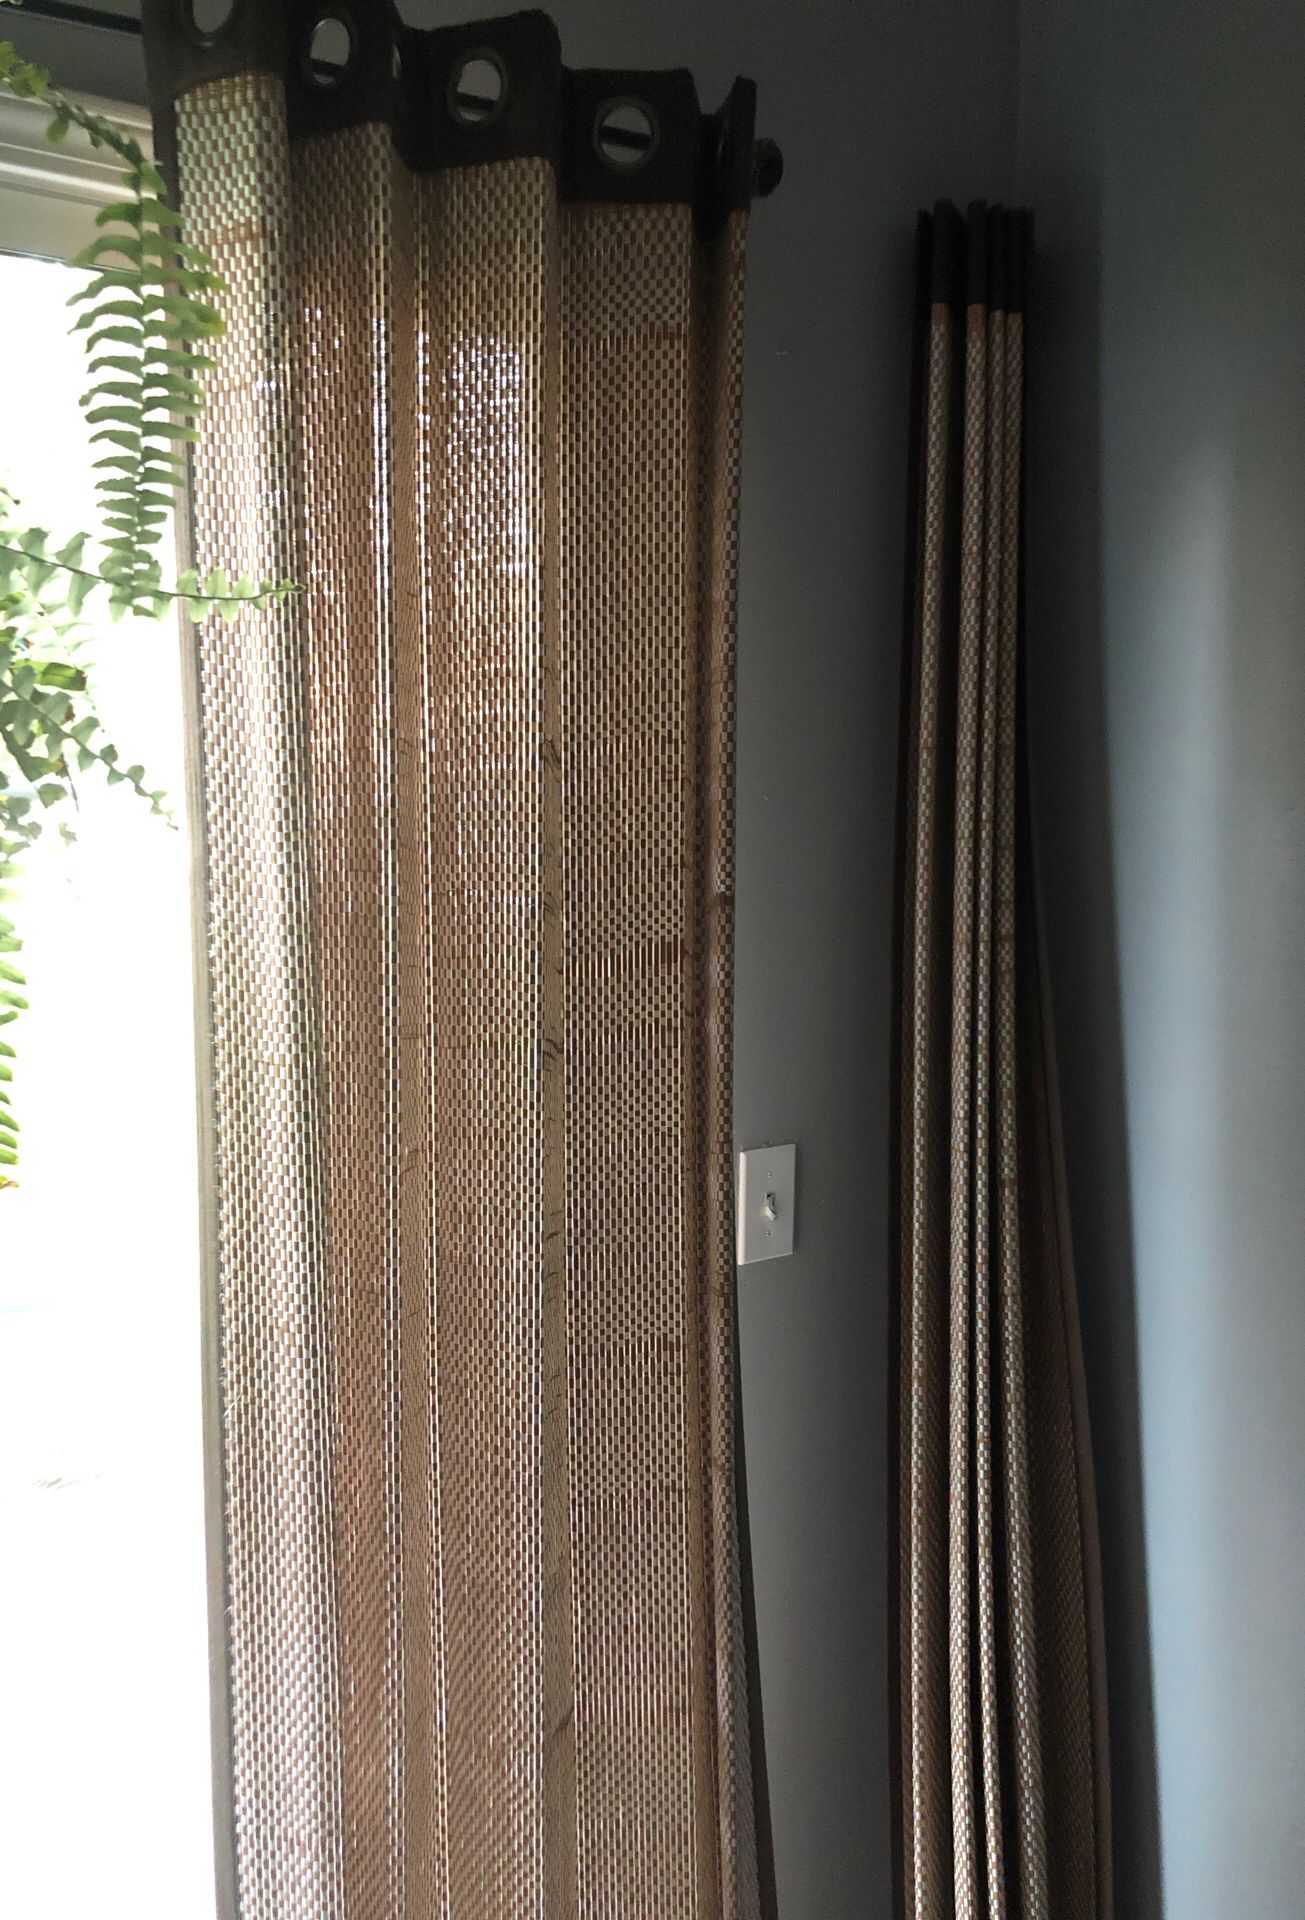 Pier 1 imports Bamboo designer window/door curtains set of 2 42 by 84 light beige/white woven firm material